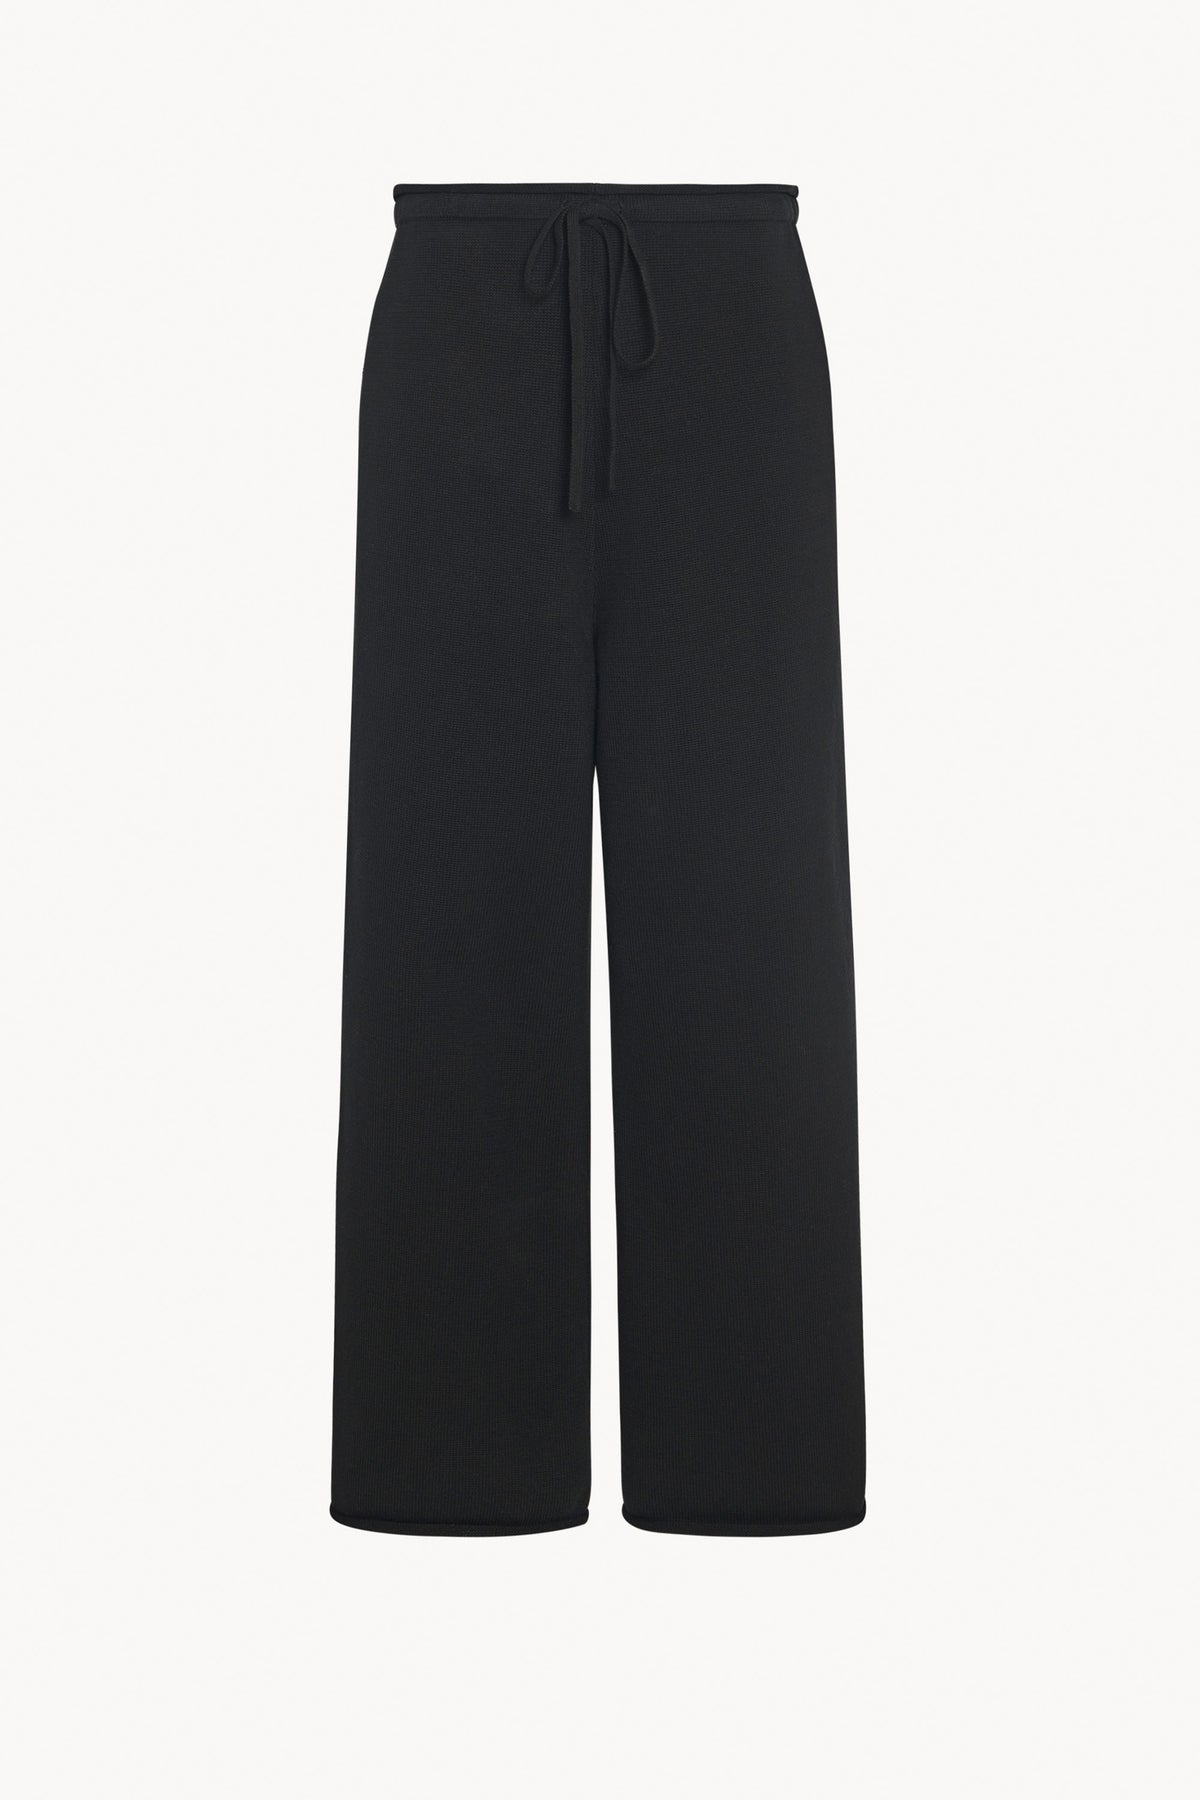 Calsito Pant in Cotton